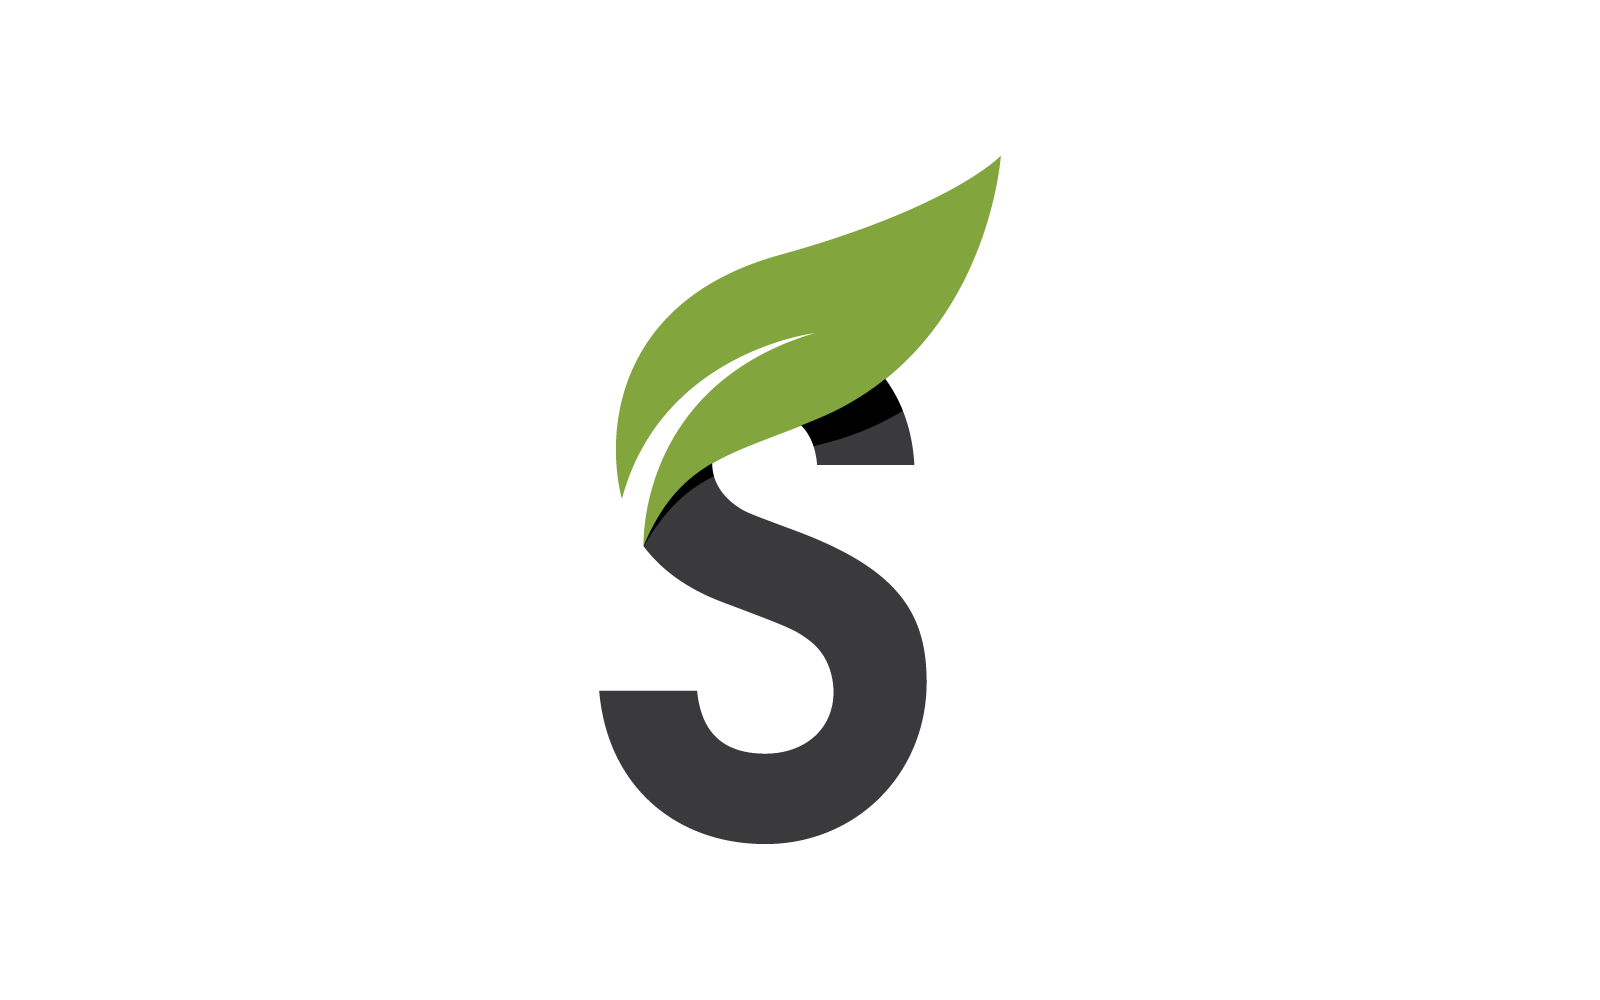 S Initial letter with green leaf logo vector flat design